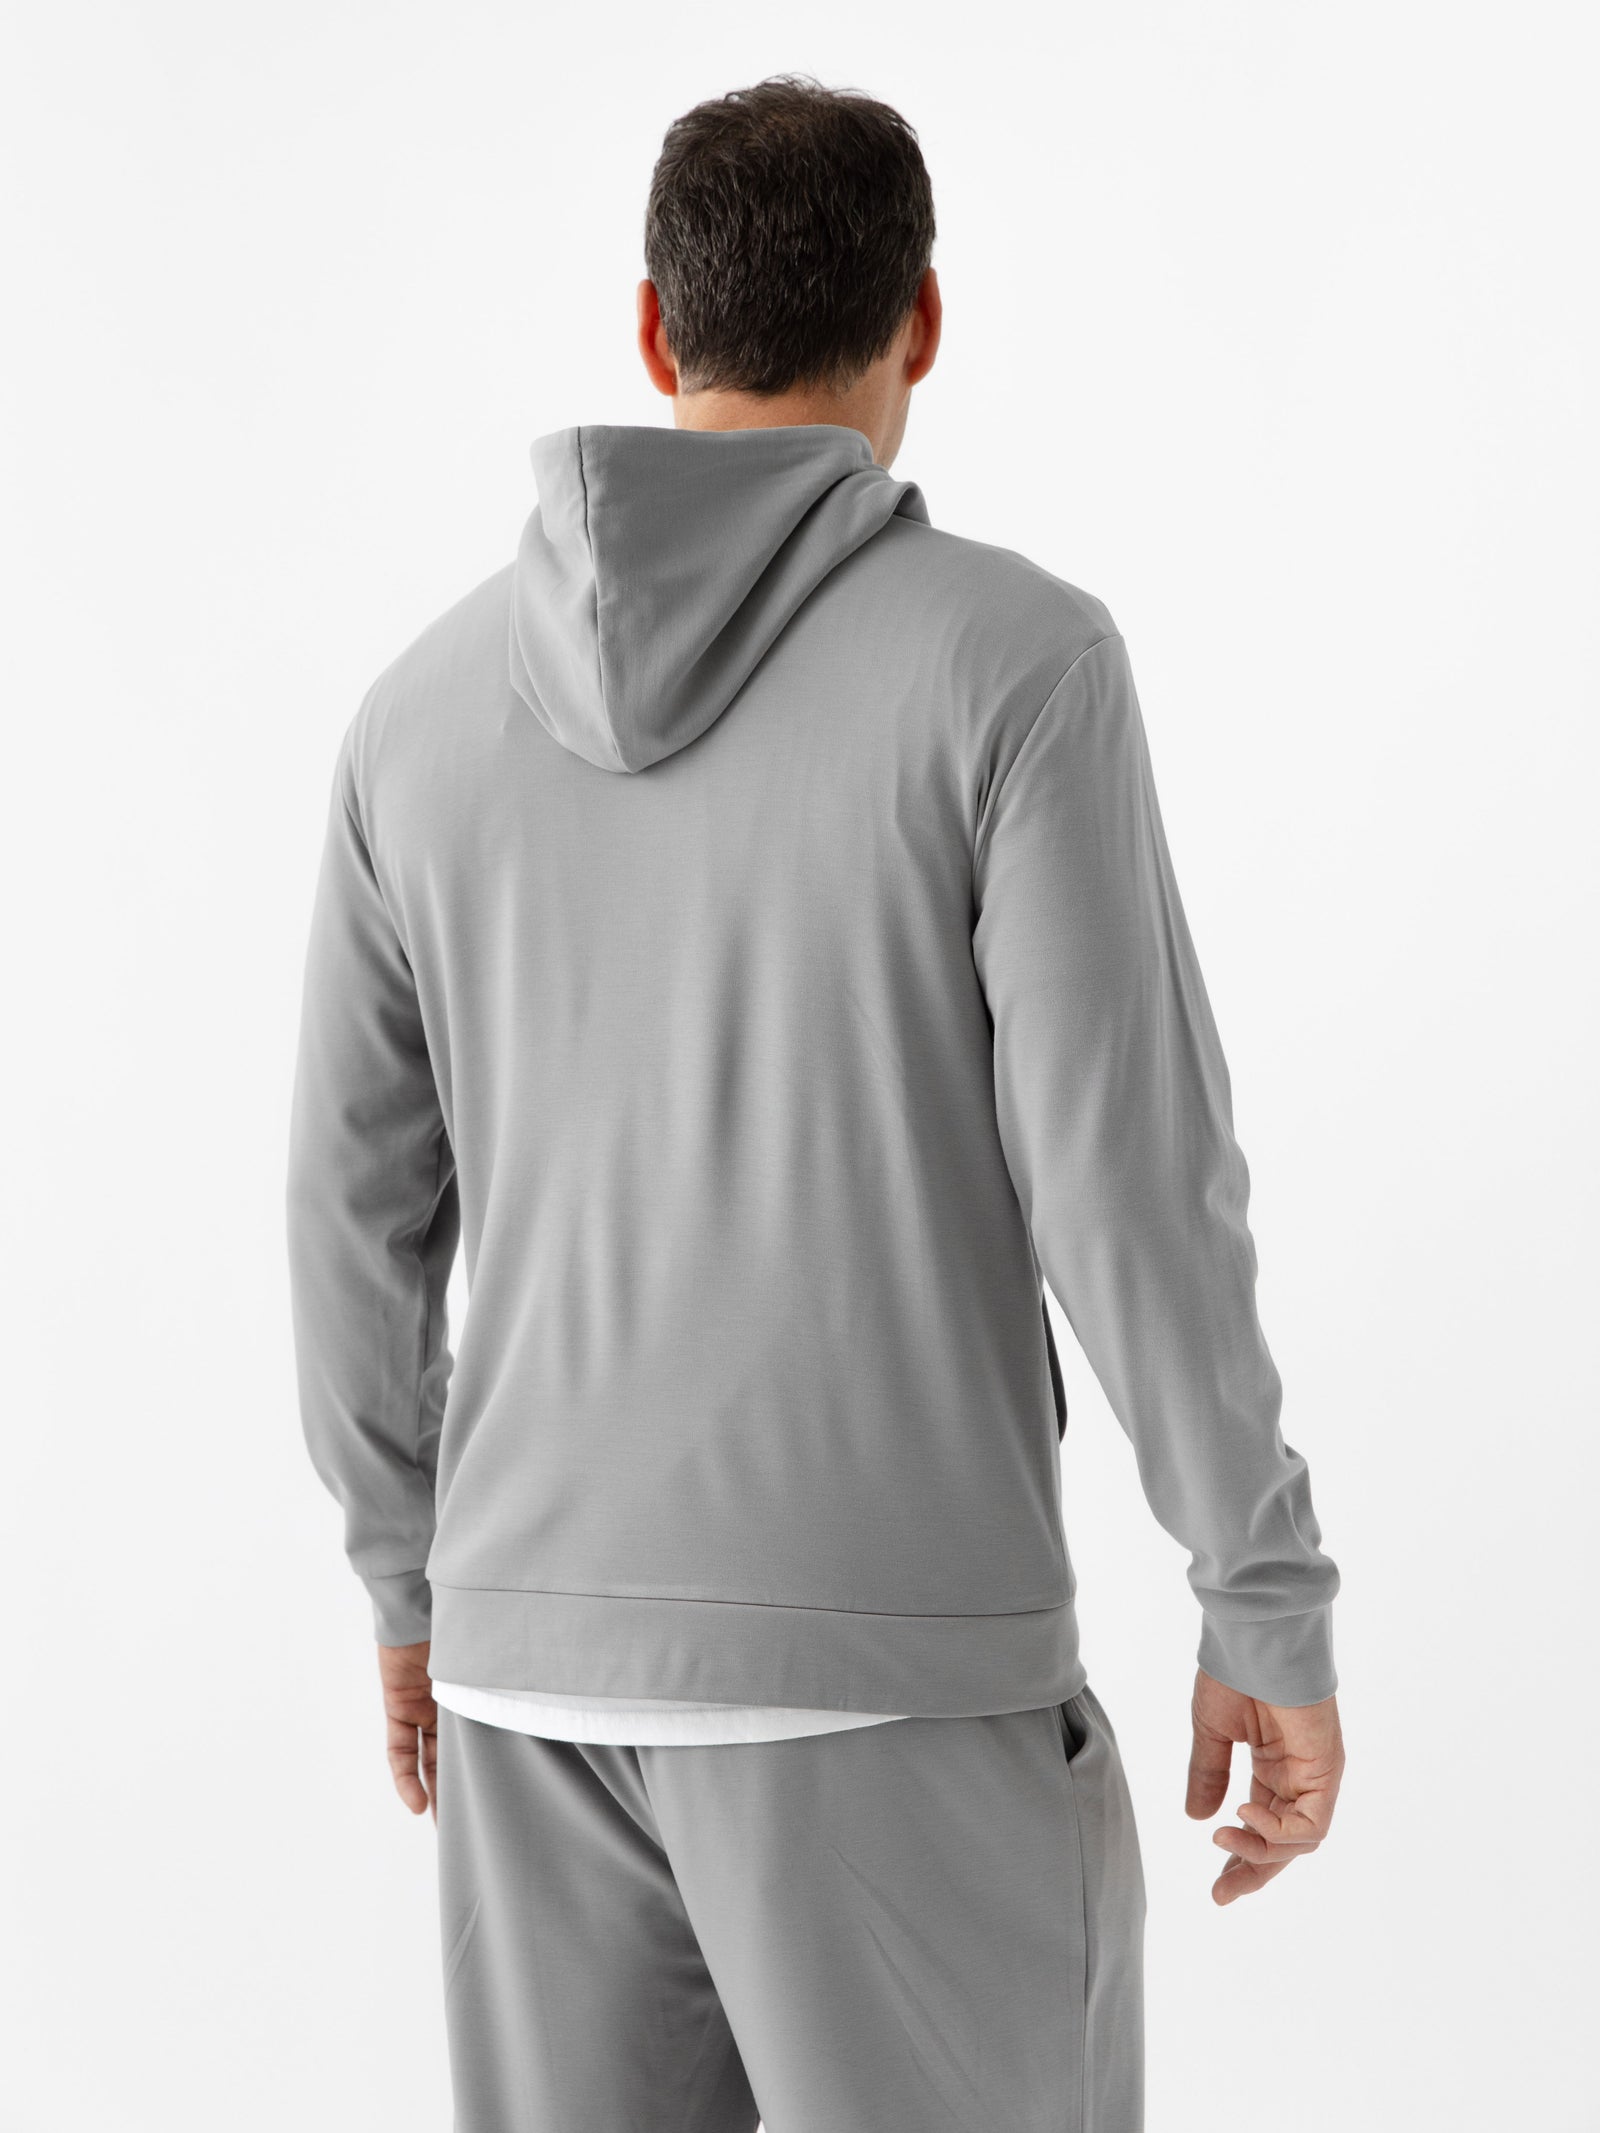 Stone Bamboo Hoodie worn by man standing in front of white background with his back facing the camera.